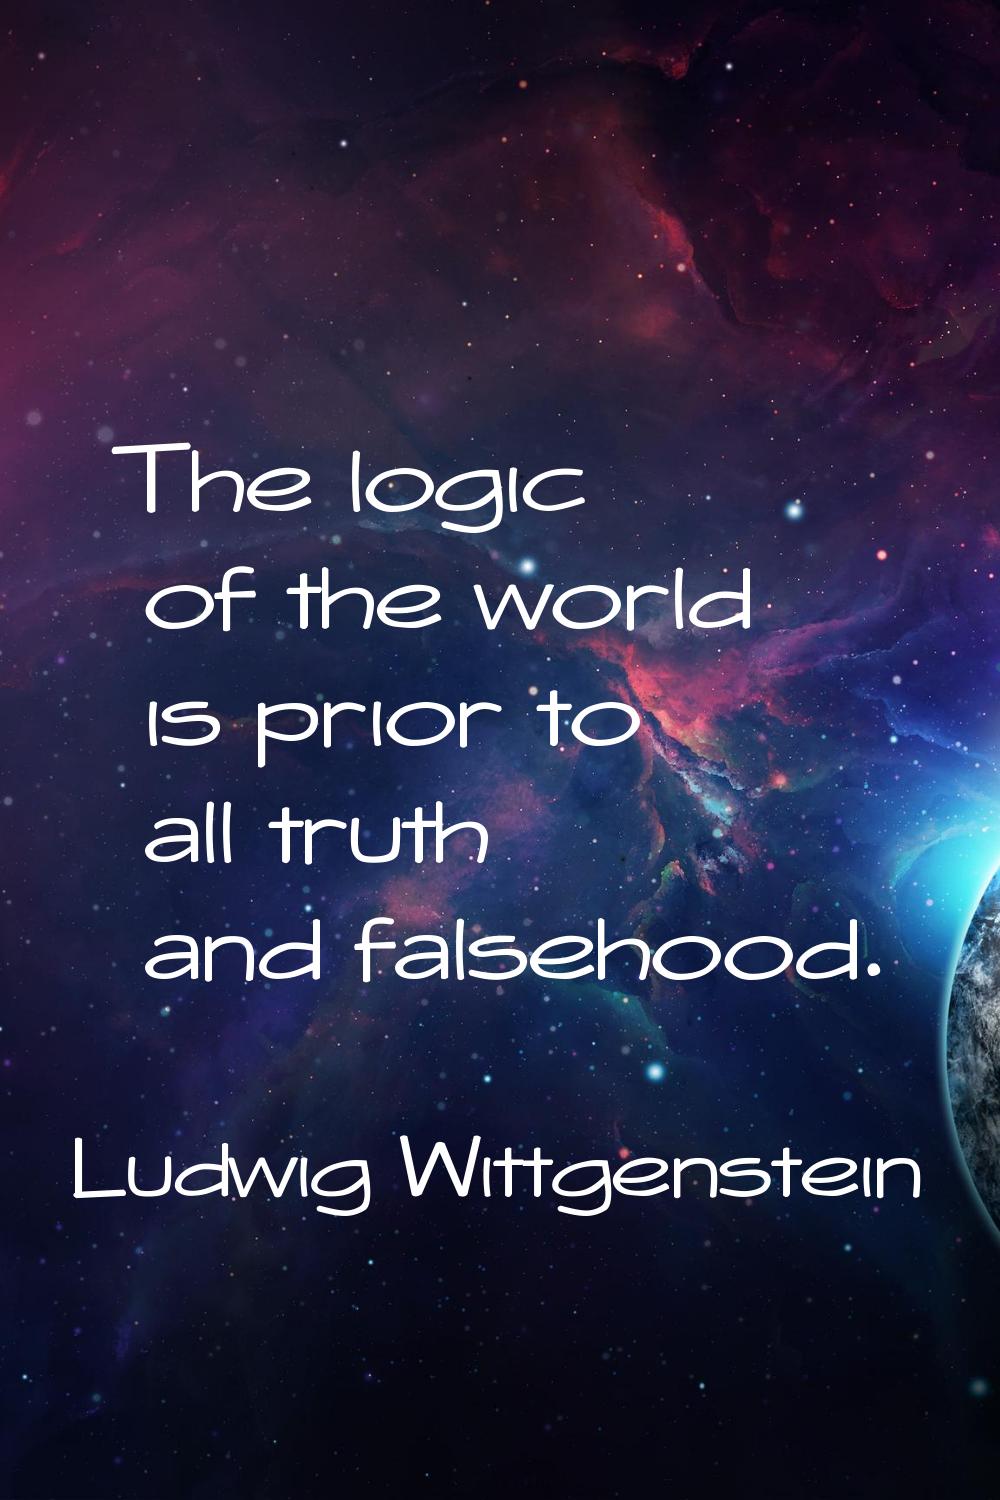 The logic of the world is prior to all truth and falsehood.